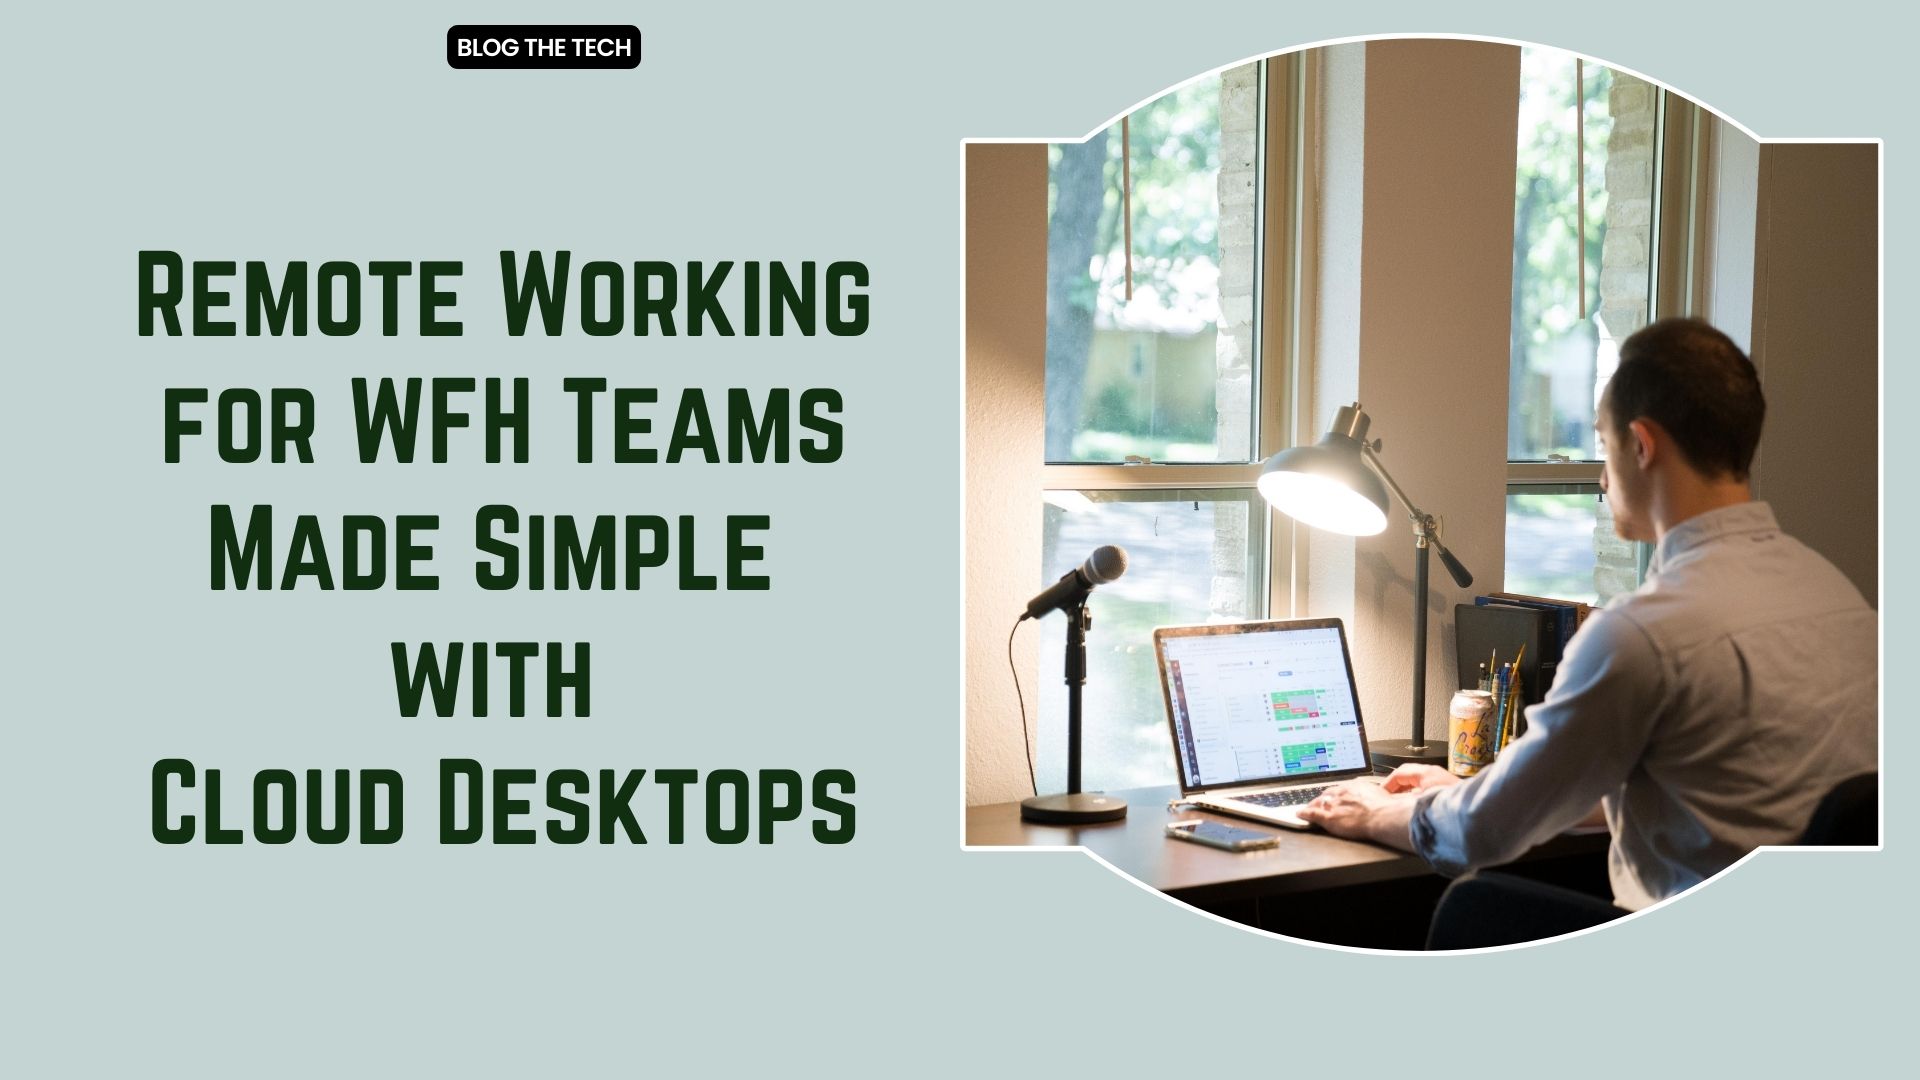 Remote Working for WFH Teams Made Simple with Cloud Desktops